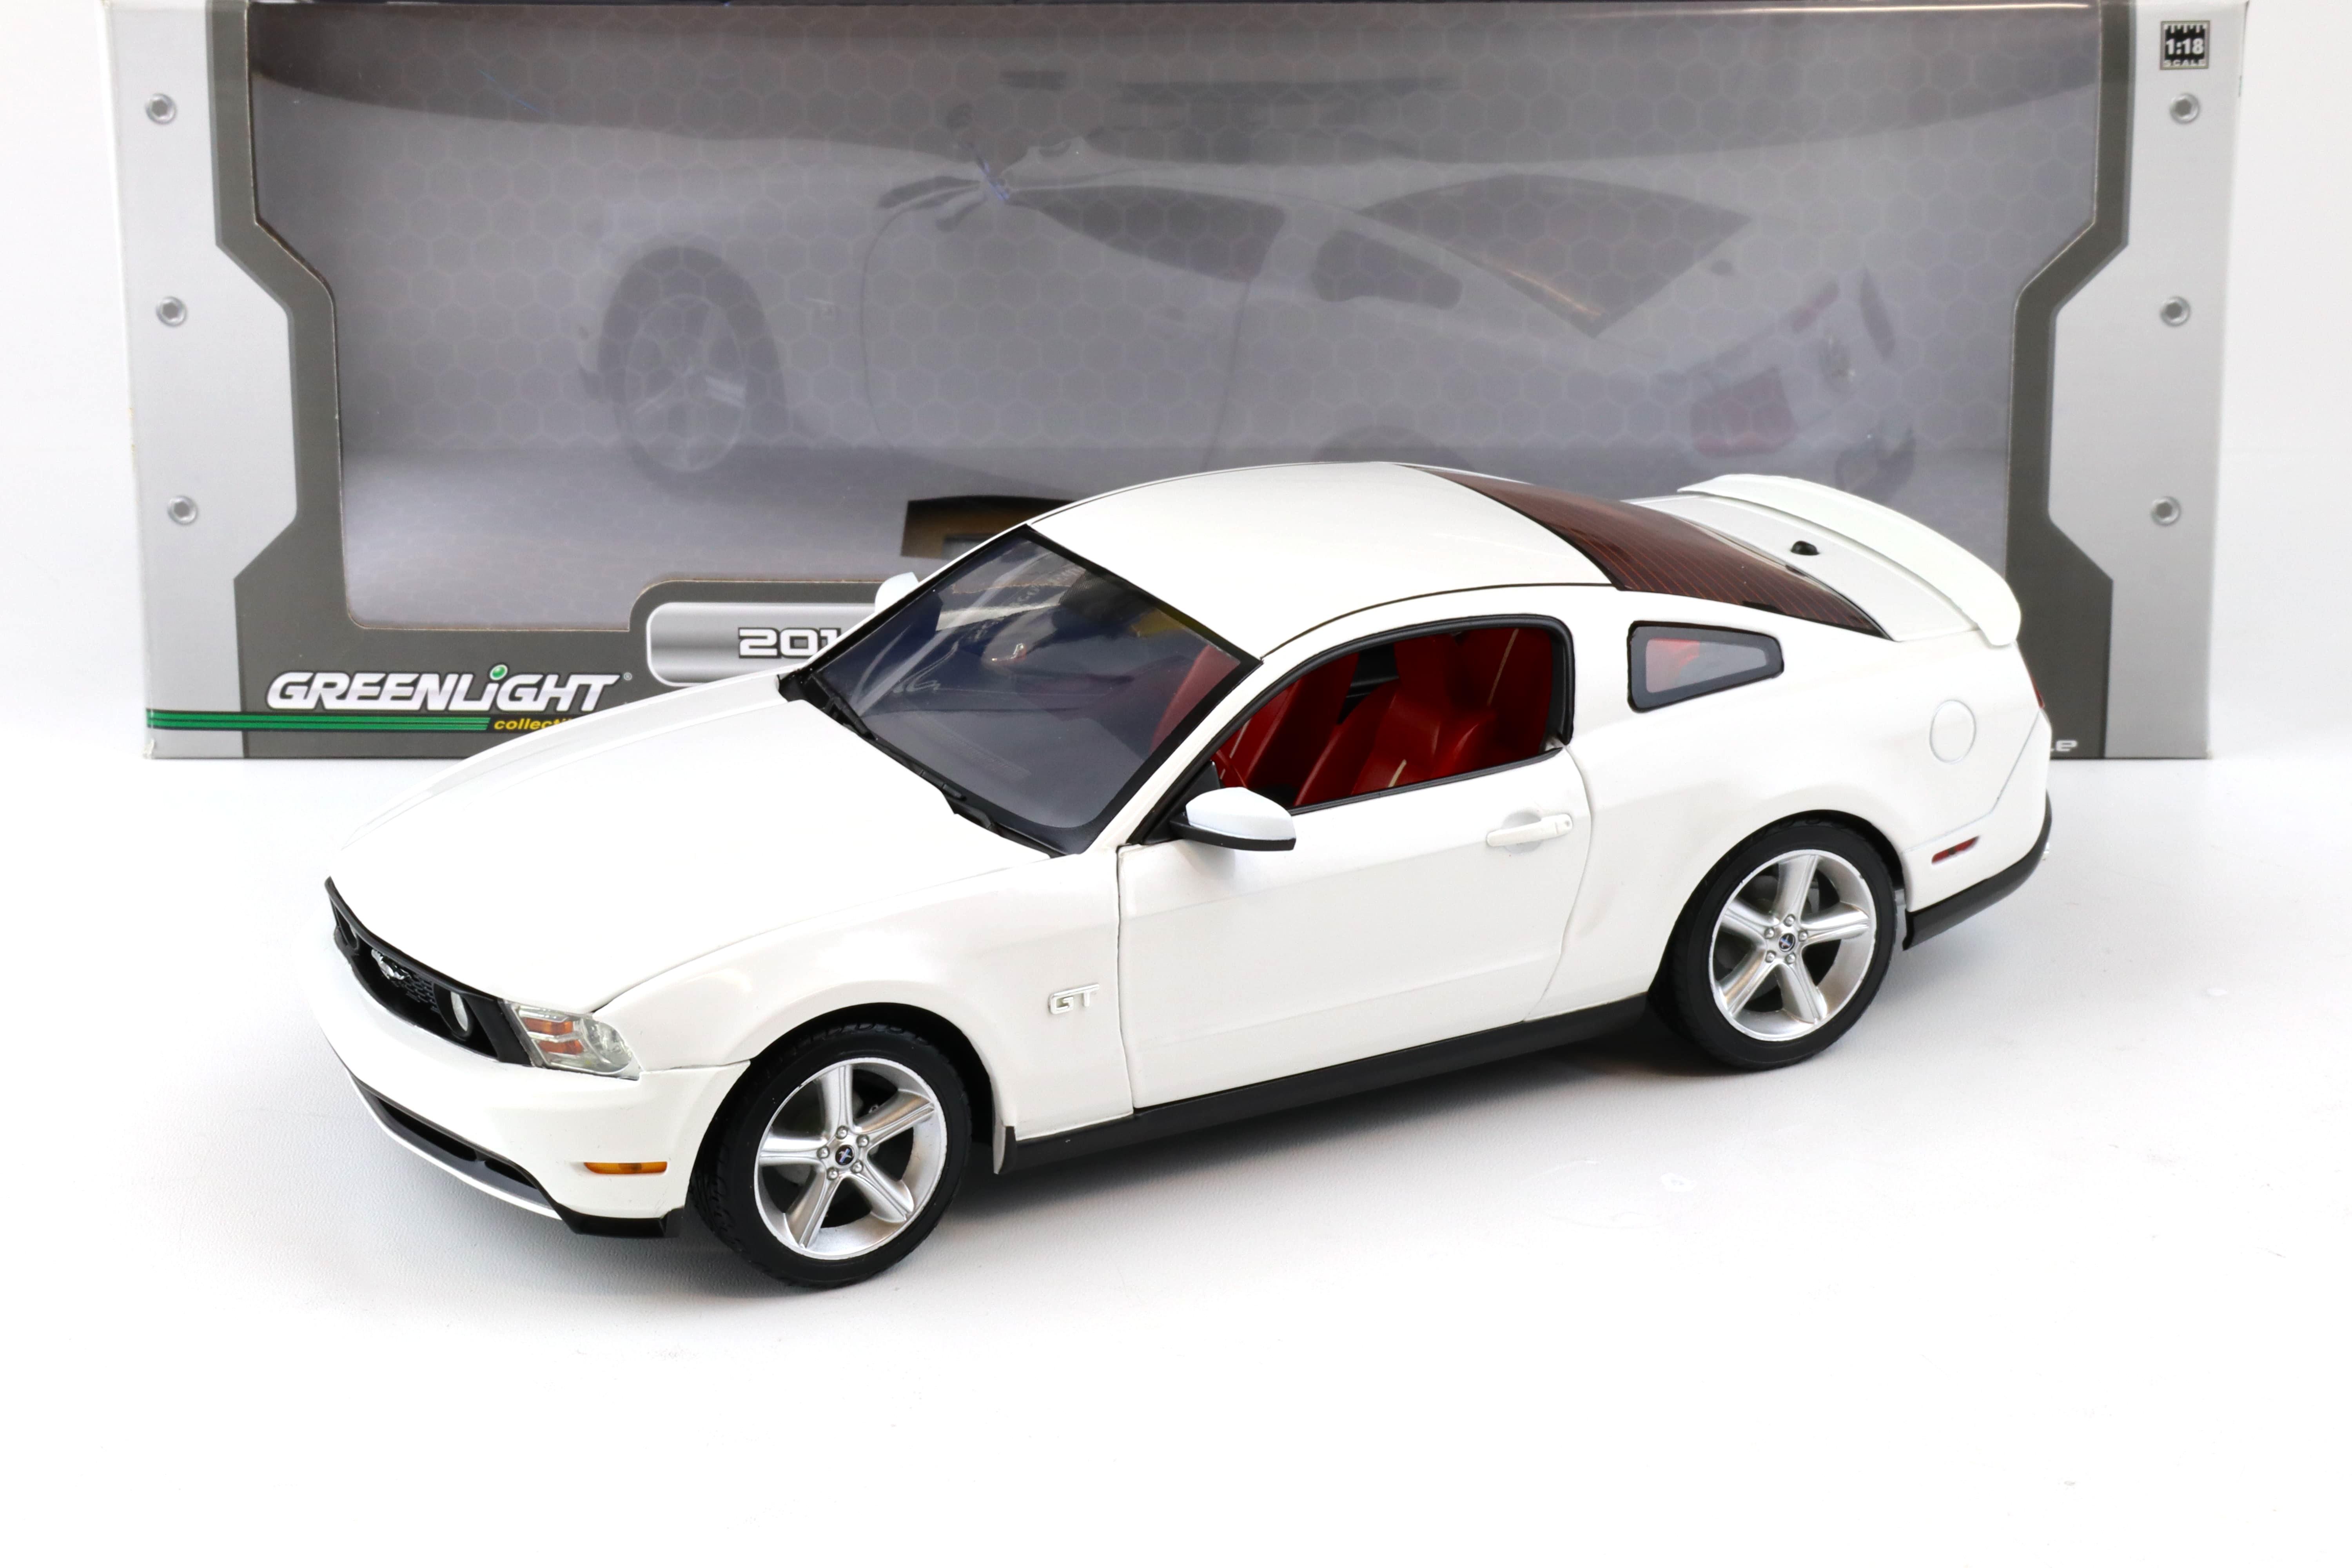 1:18 Greenlight 2010 Ford Mustang GT Coupe white/ red interior 12814